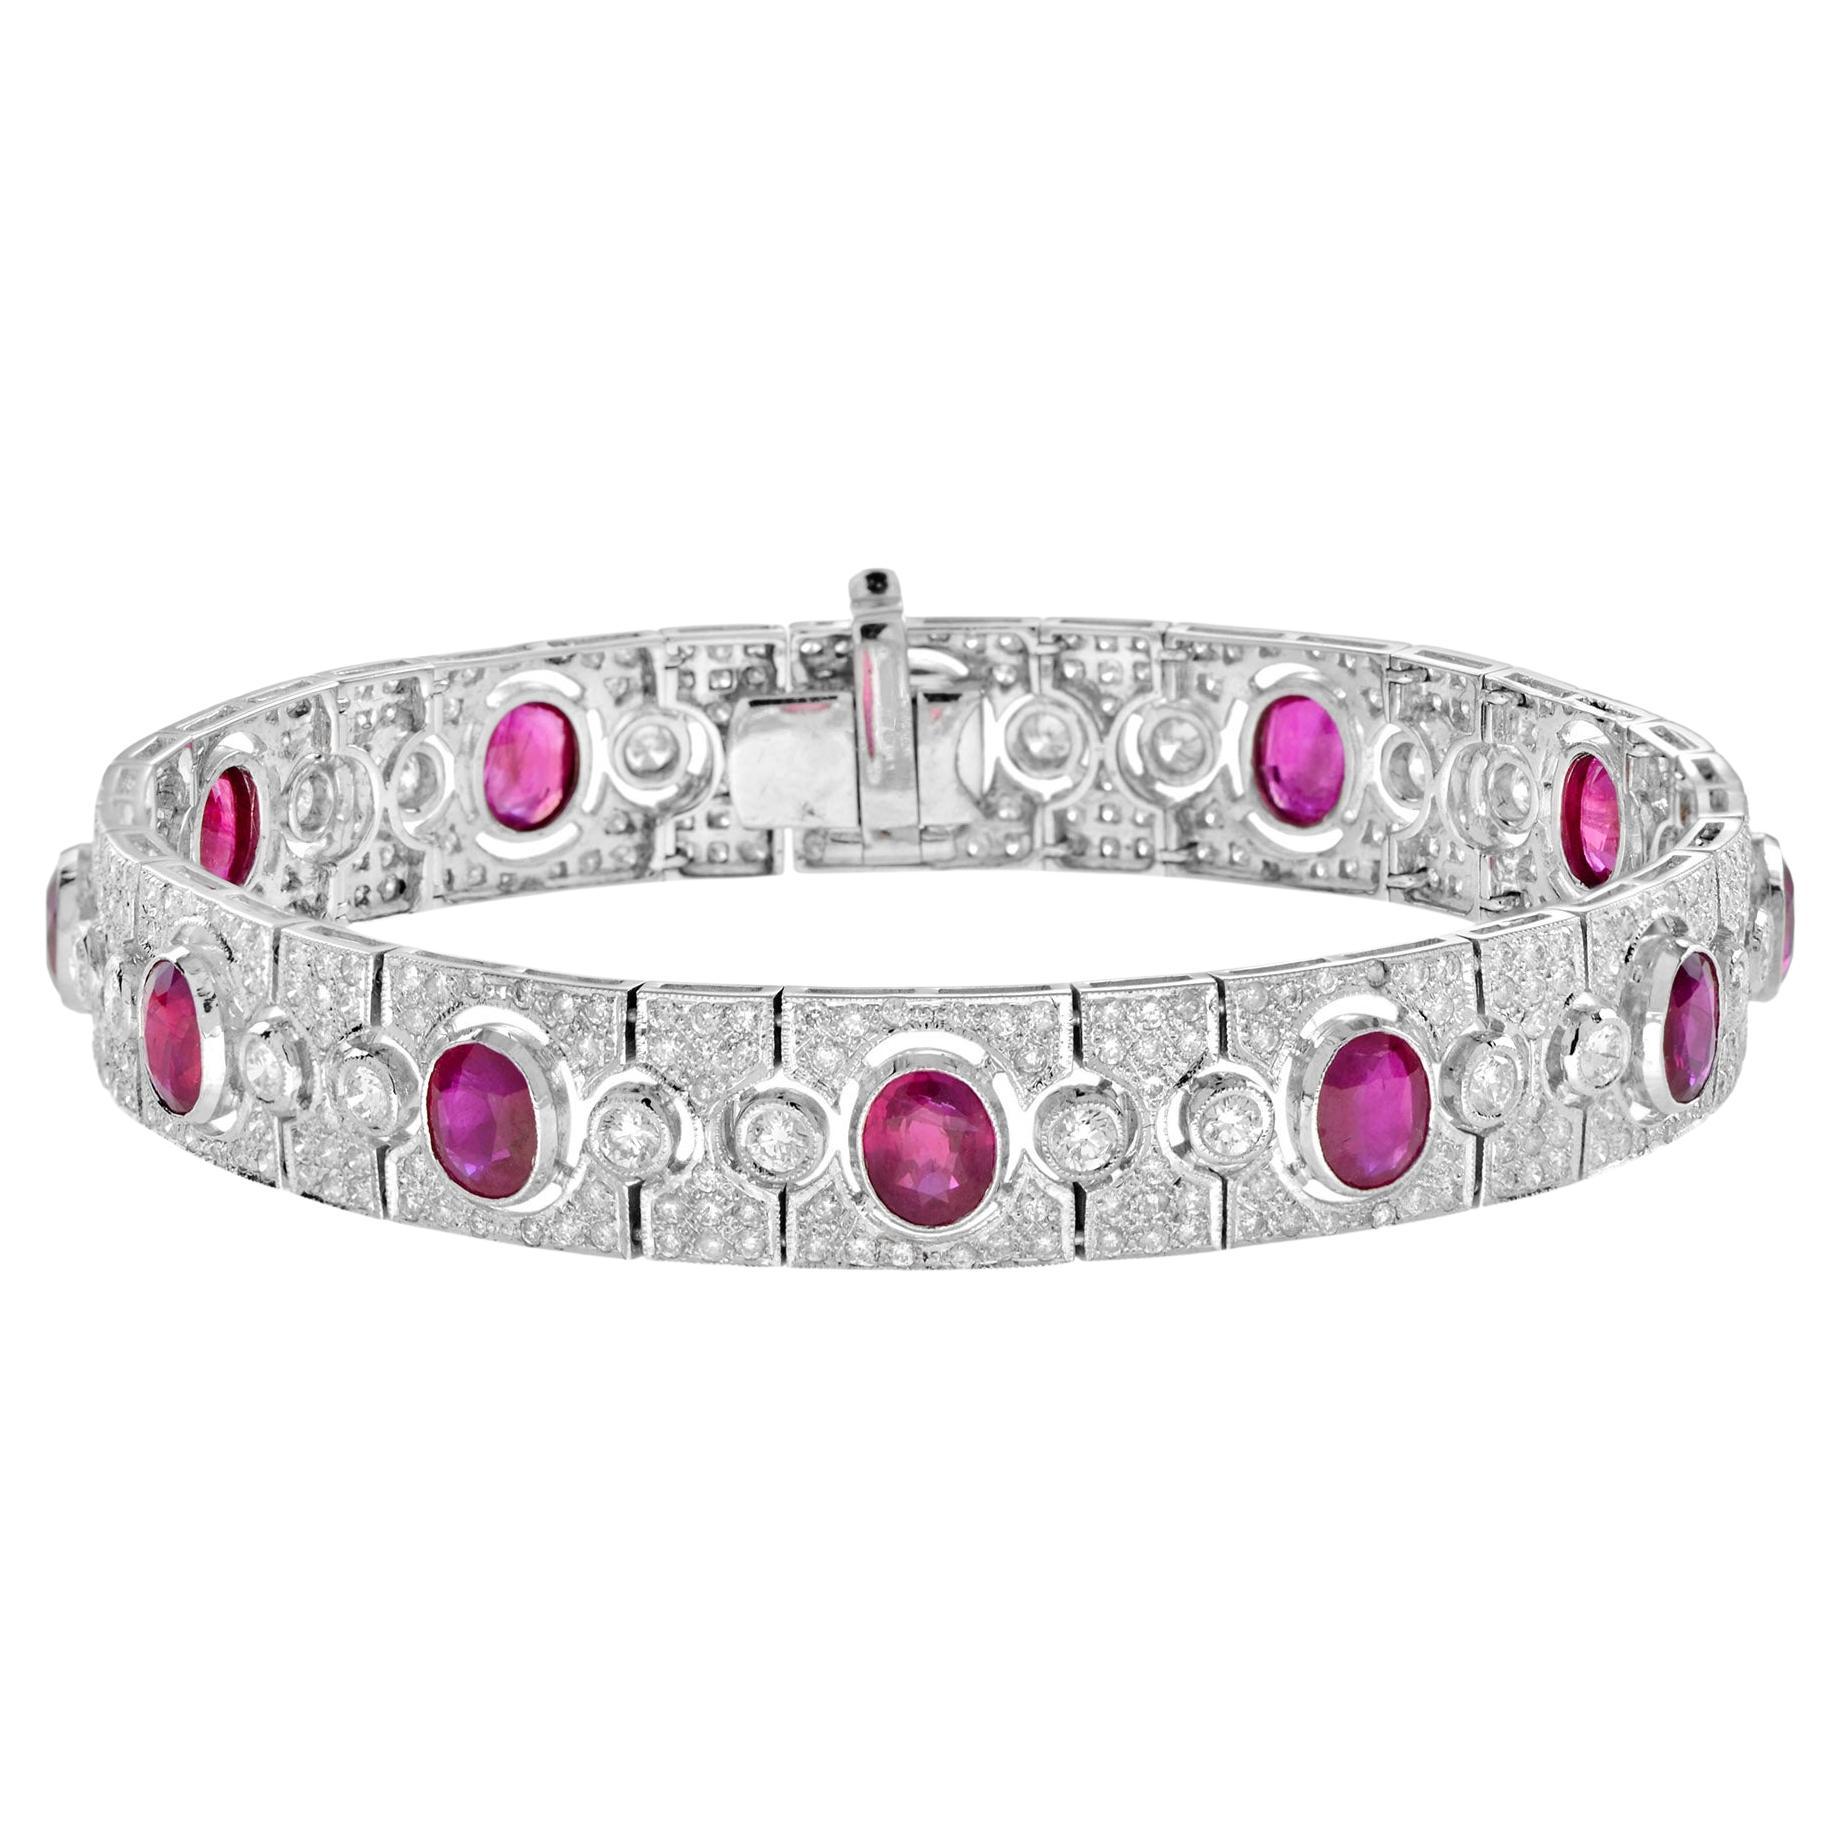 Art Deco Style 8.87 Ct. Oval Ruby and Diamond Bracelet in 18K White Gold